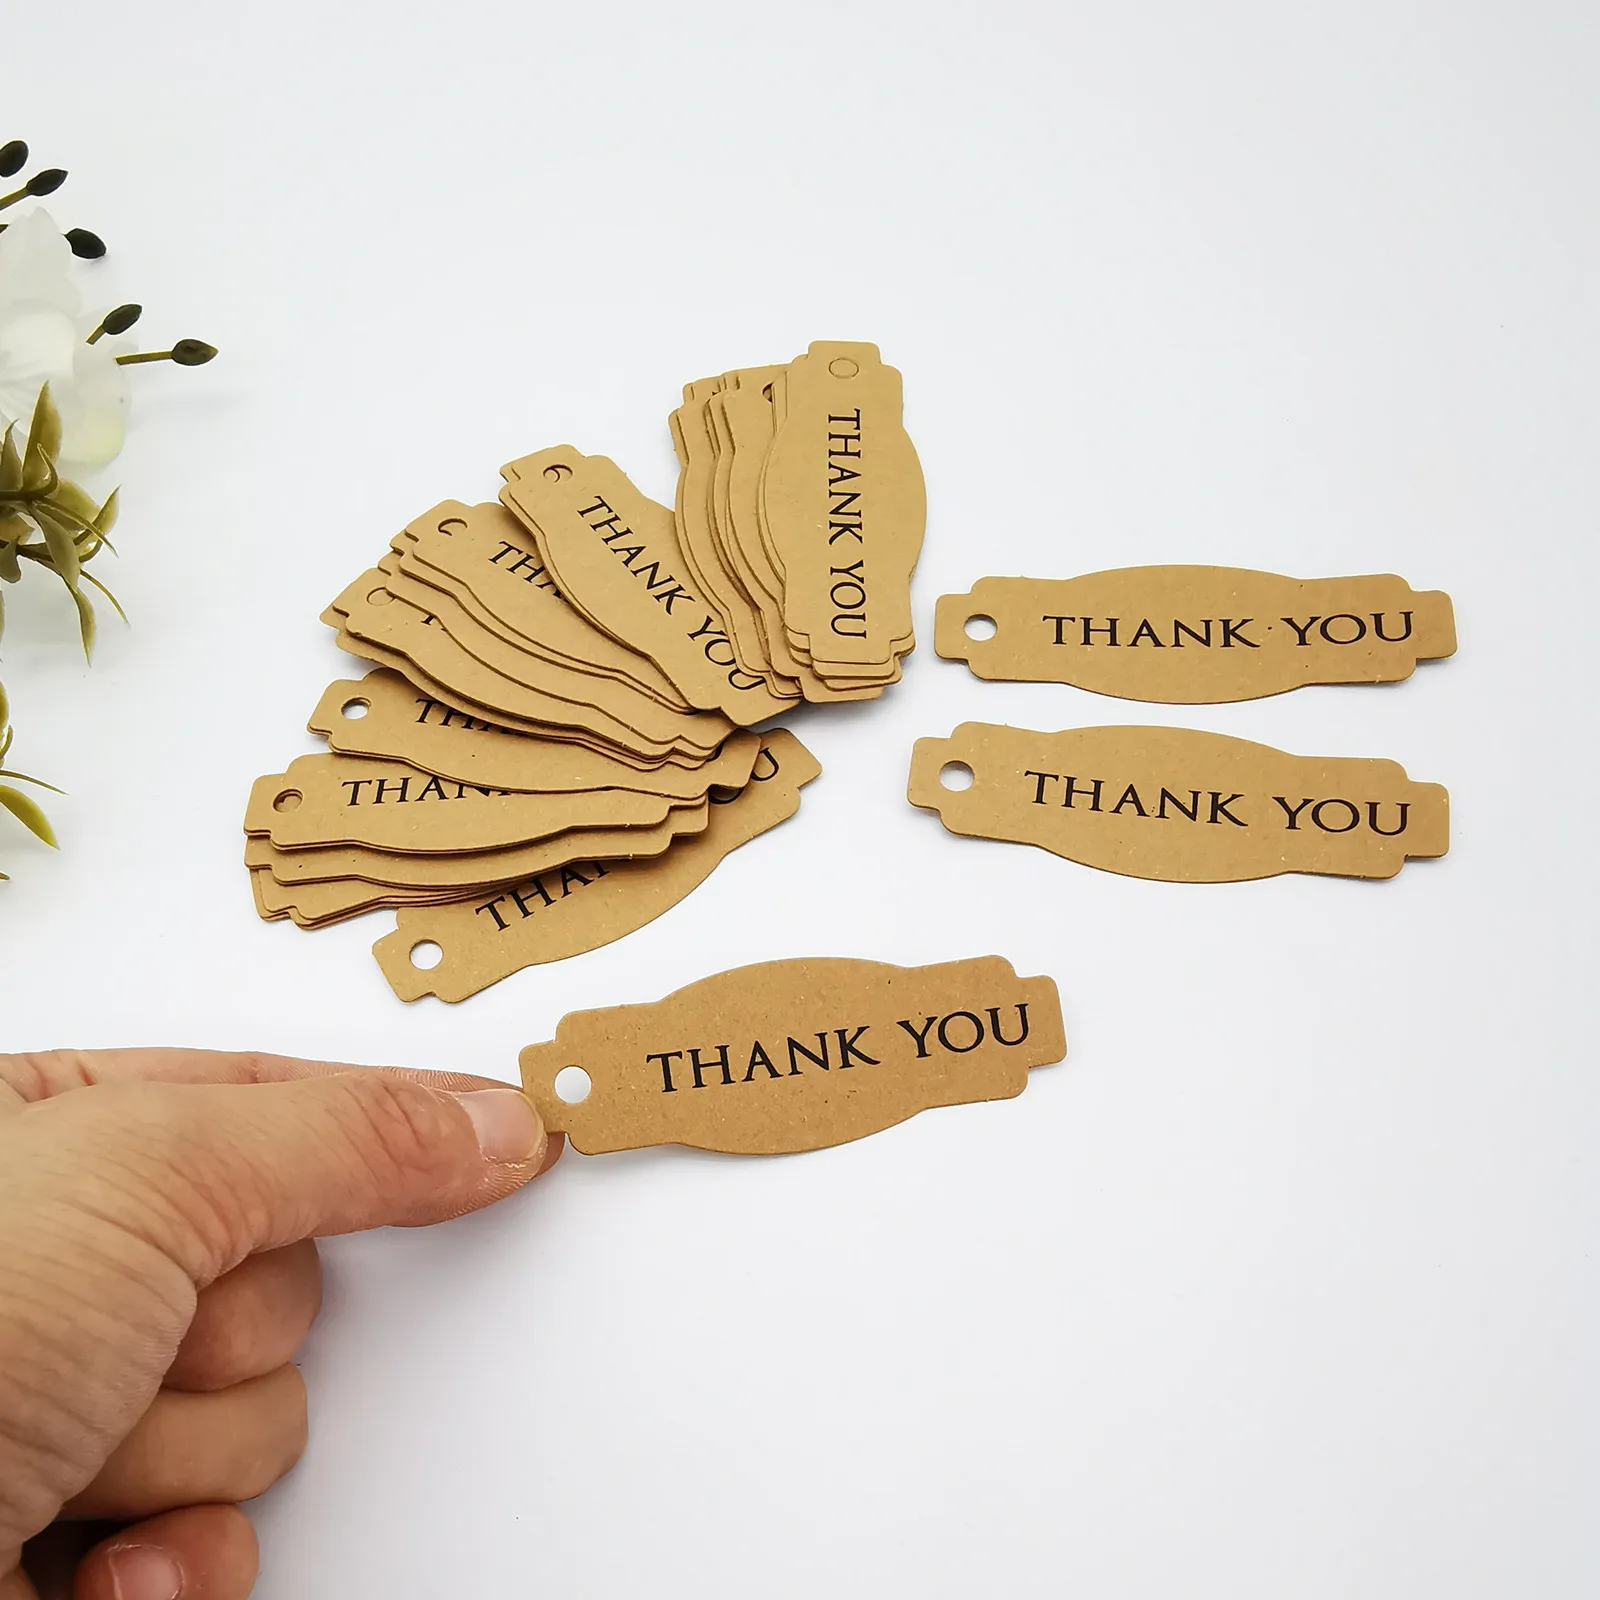 
Kraft Paper Little Gift Box Ornaments Thank You Note Candy Box Decorations Small Decorative Items 